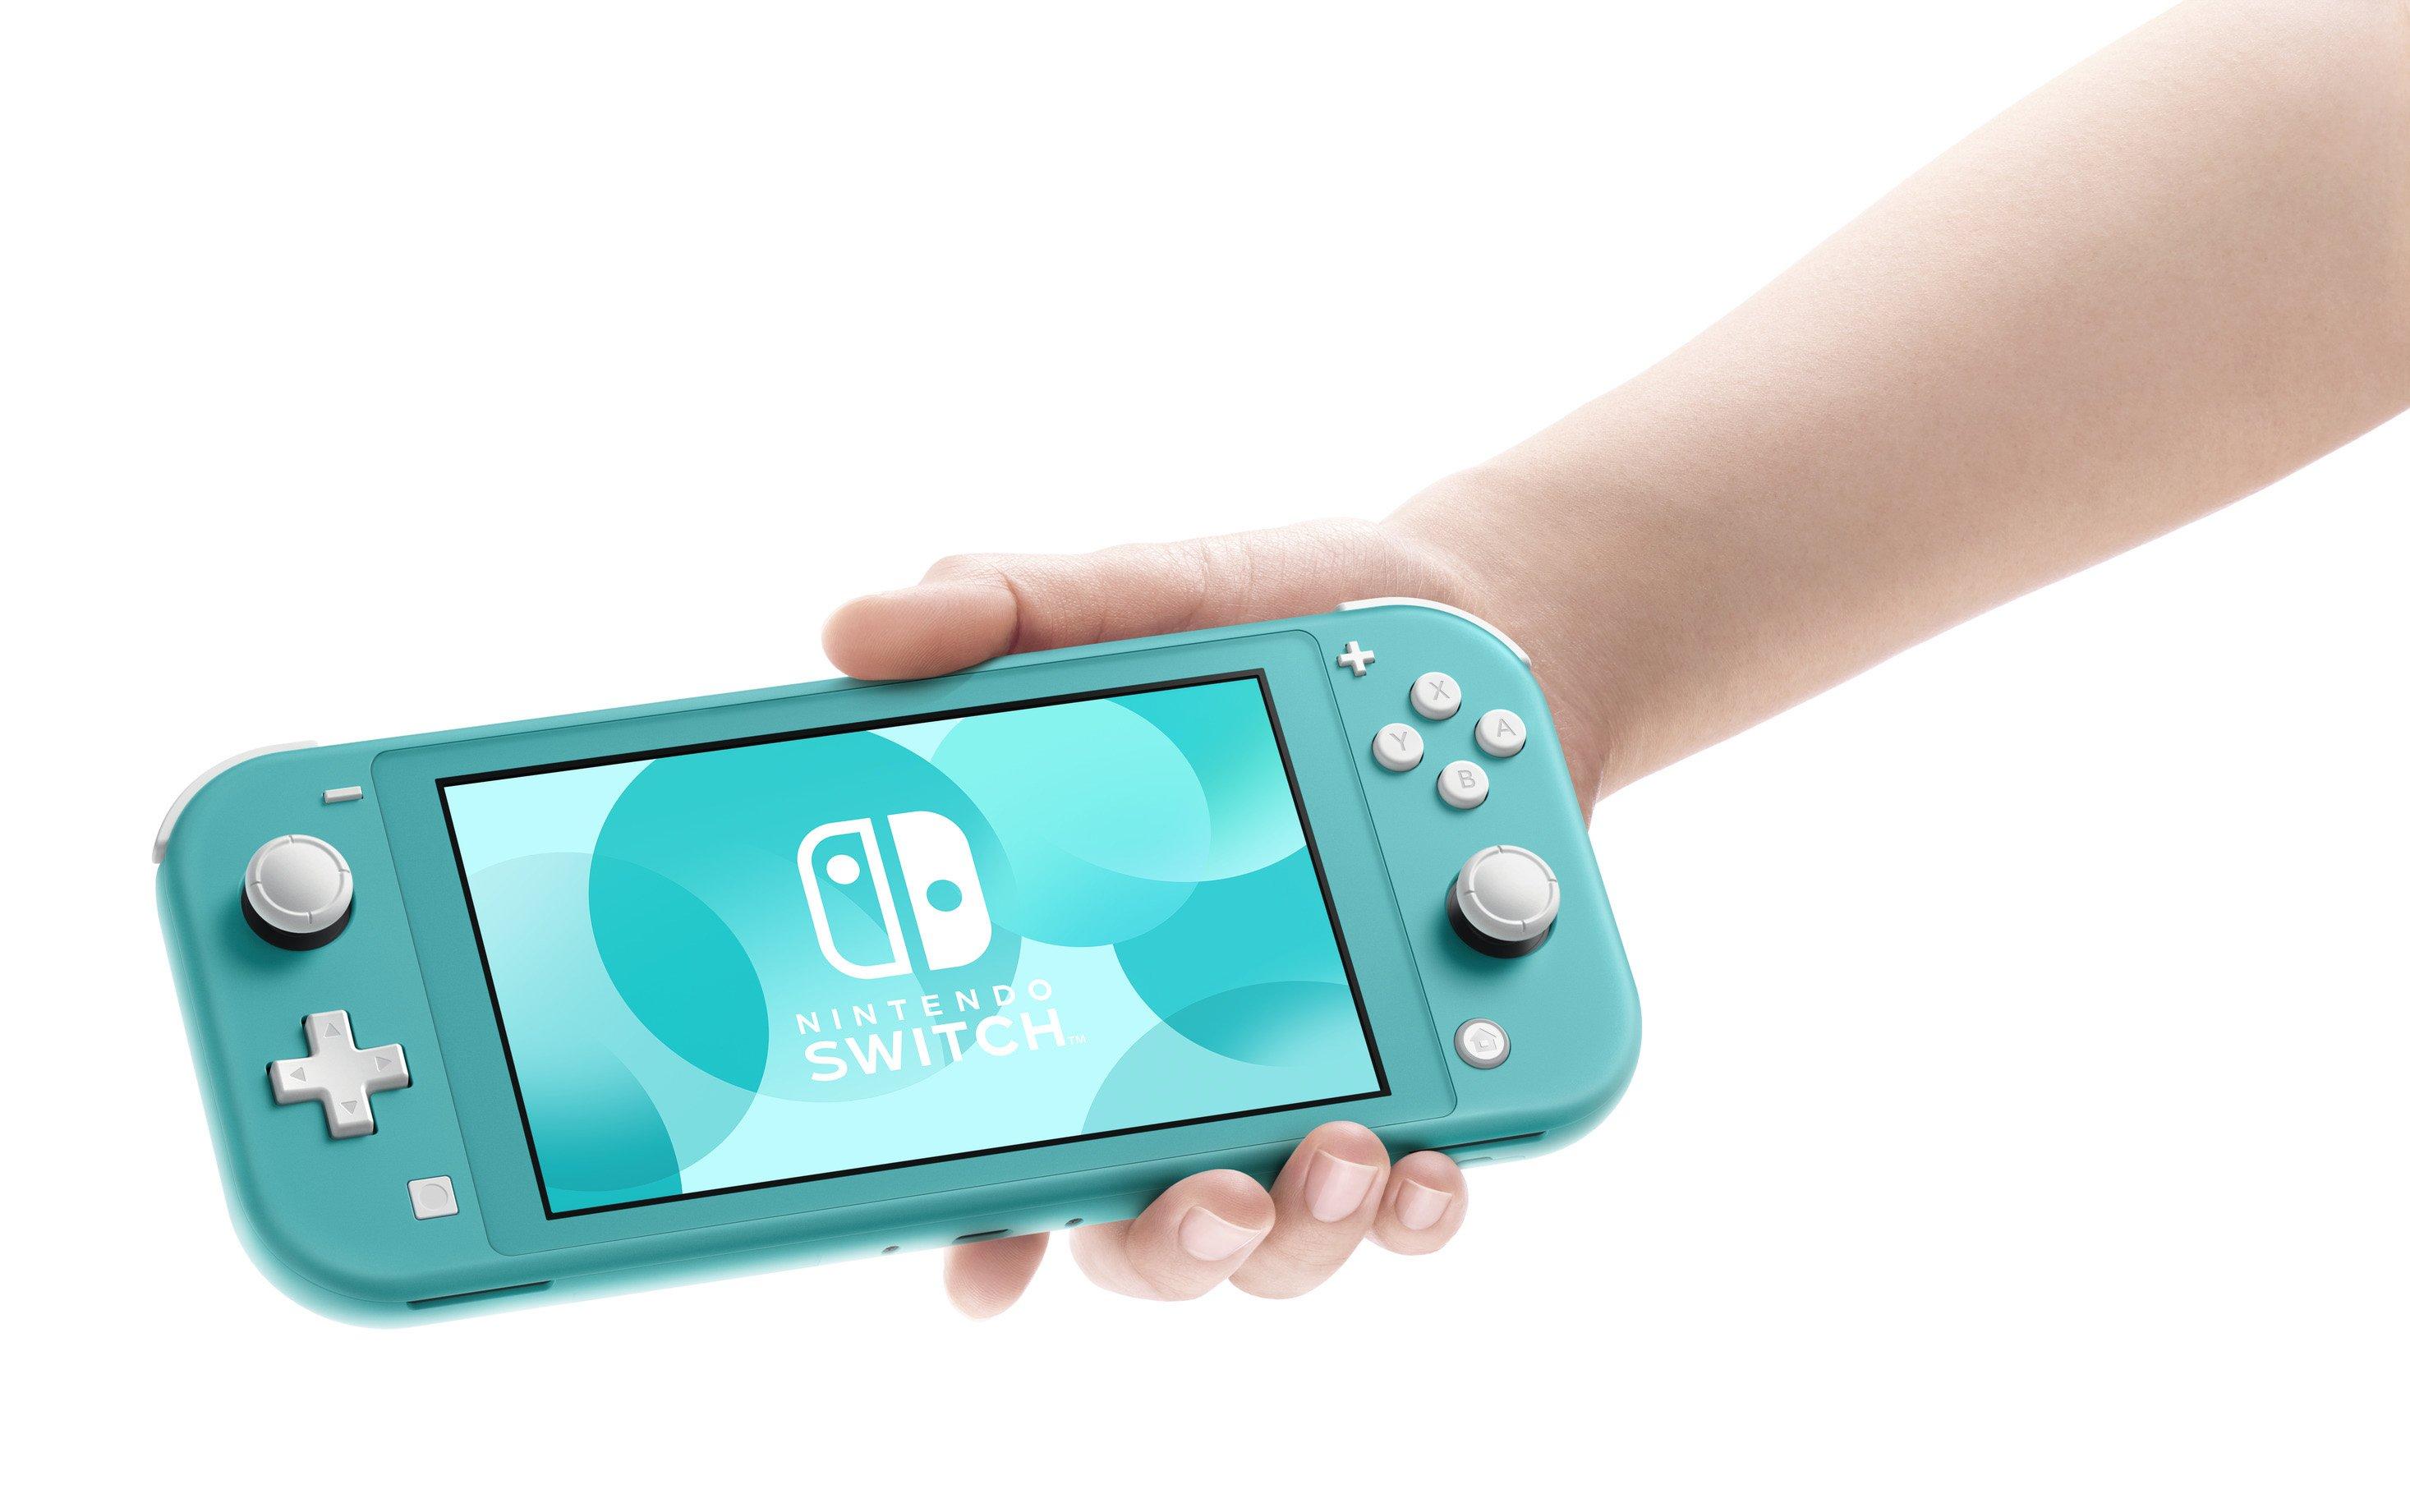 trade in value for switch lite